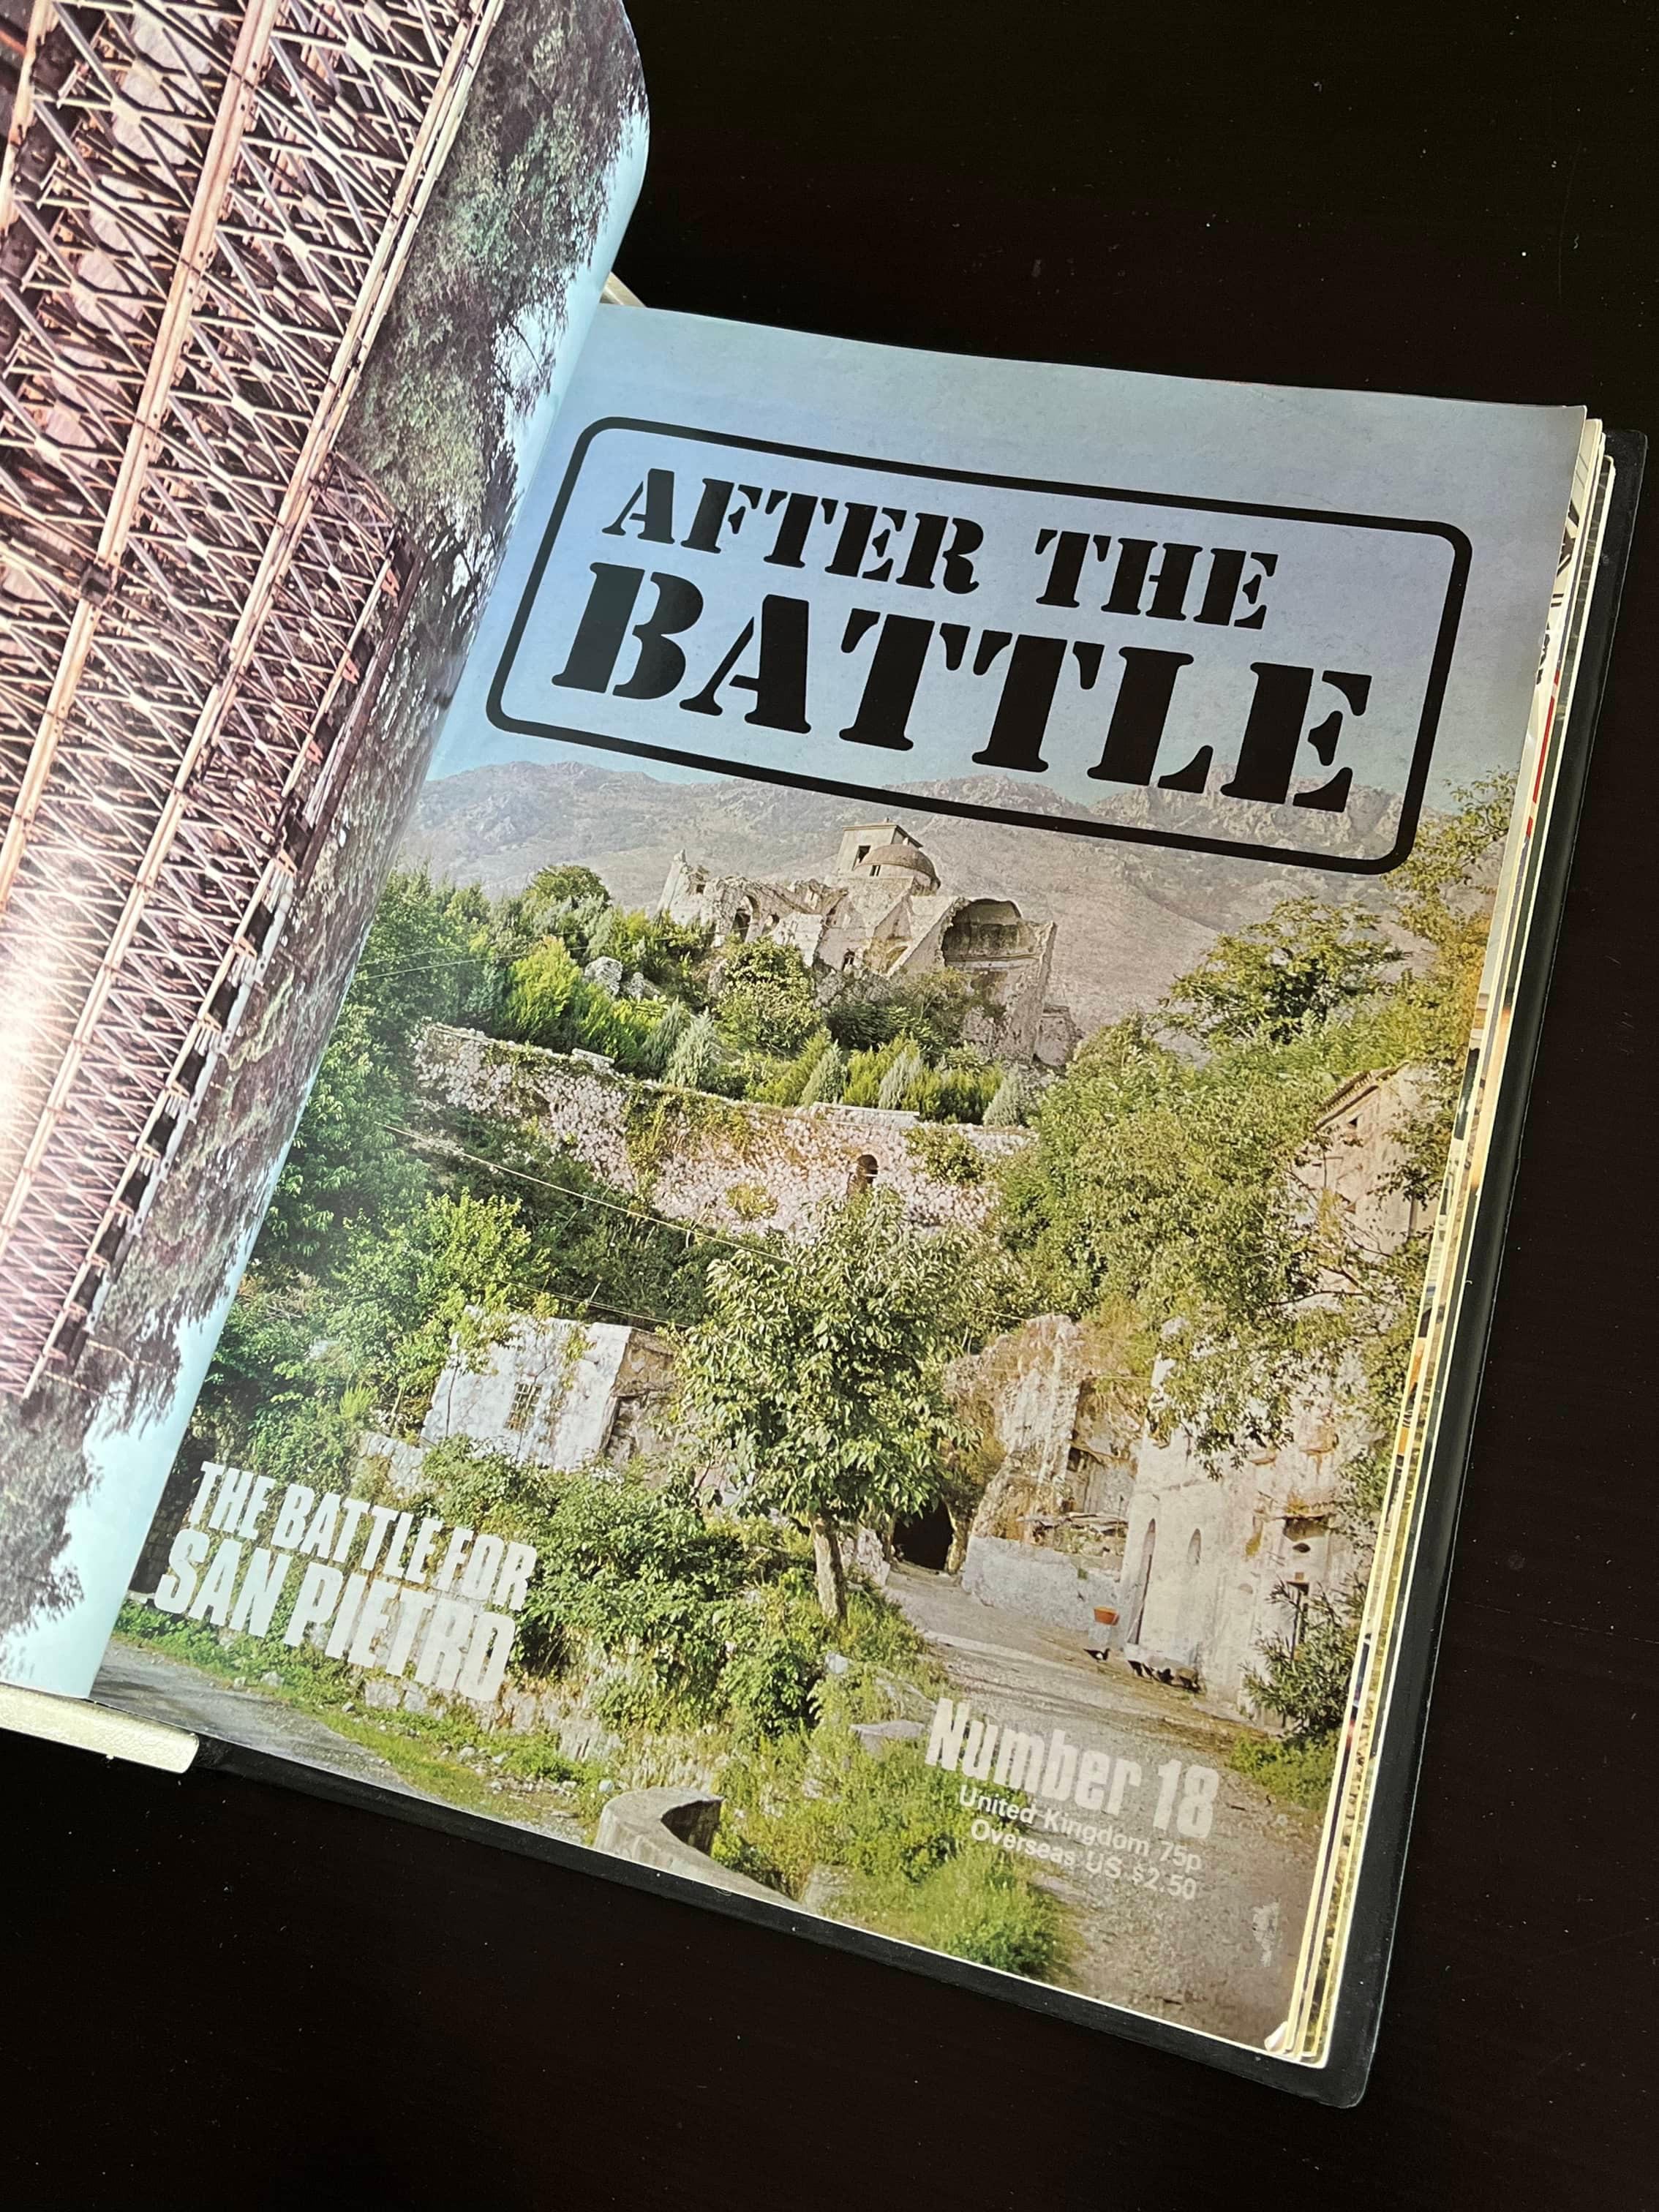 Bound Volume of Early Issues of "After the Battle"